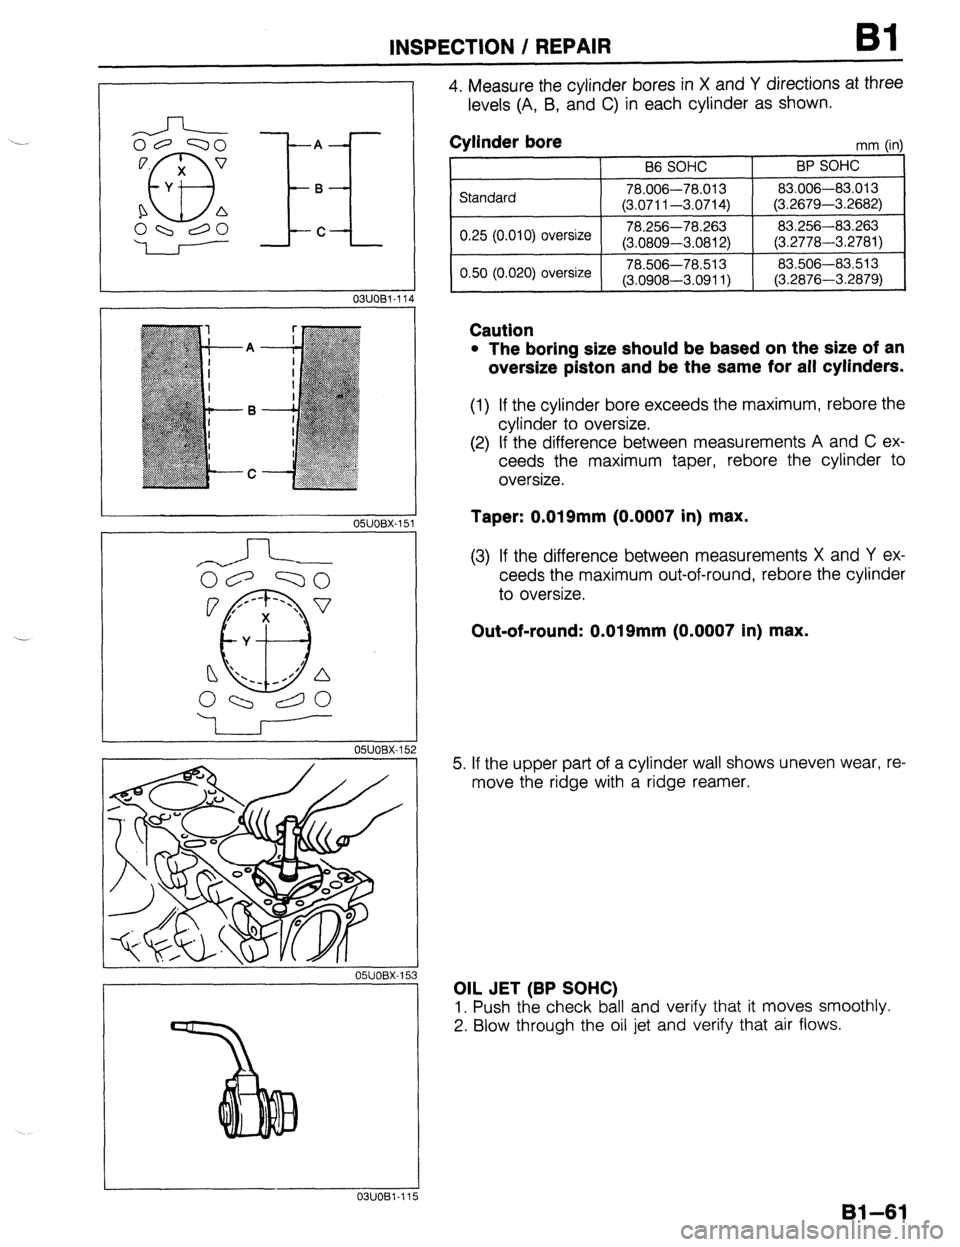 MAZDA PROTEGE 1992  Workshop Manual INSPECTION / REPAIR Bl 
.-J- 
03UOBl-11 
05UOBX-1: 
OWOBX-15 4 
il 
2 
3 
_I 
5 
OWOBX-15: 
03UOBl-11: 
4. Measure the cylinder bores in X and Y directions at three 
levels (A, B, and C) in each cylin